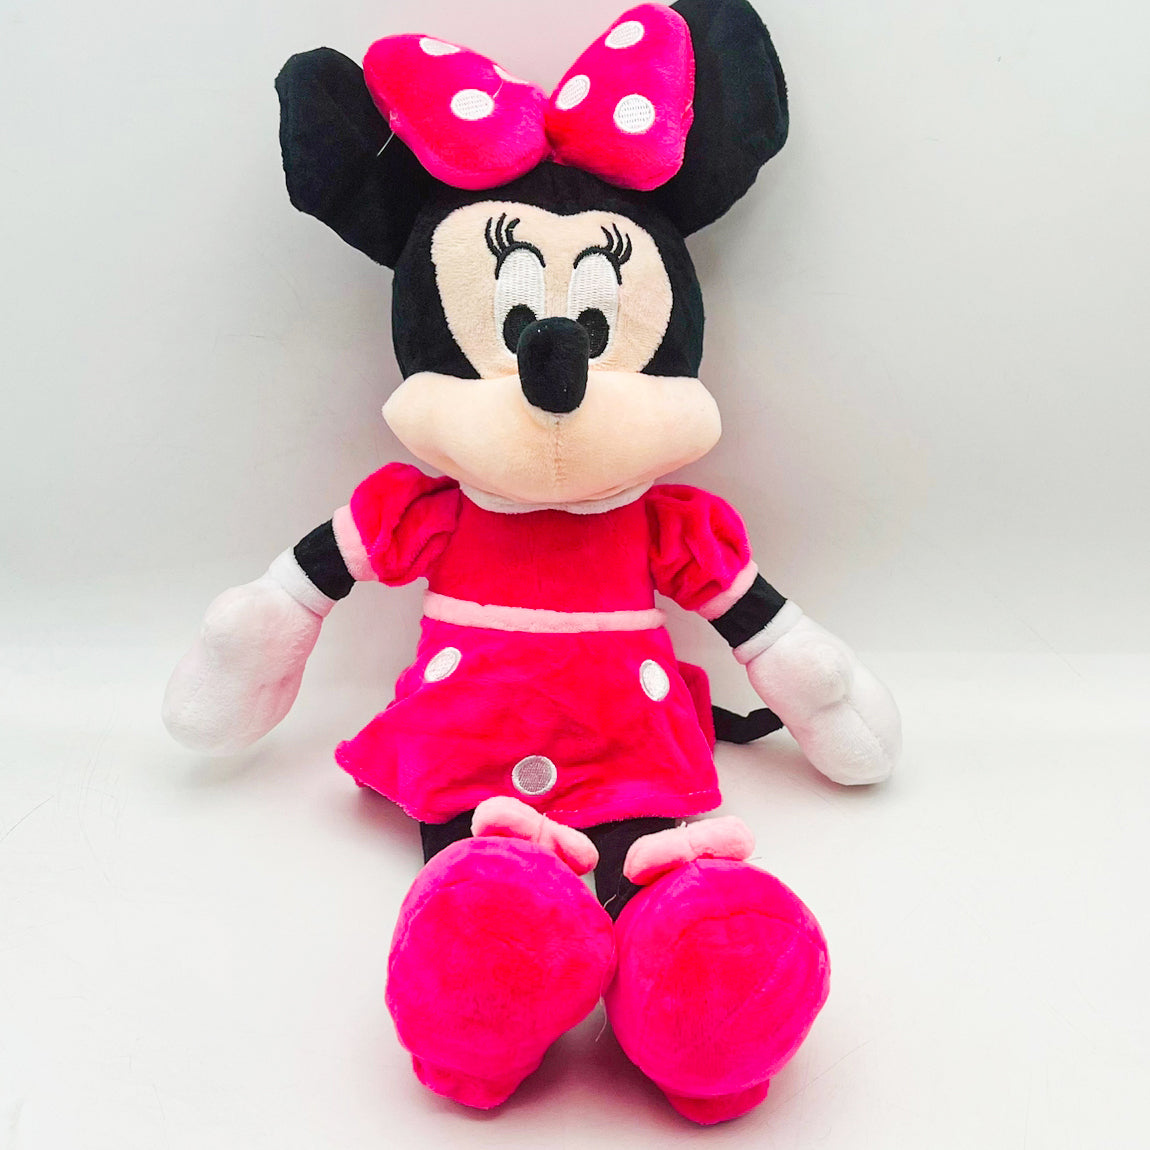 Cute Disney Mickey Mini Plush Toys, Super Soft Stuff Toy For Kids And Adults